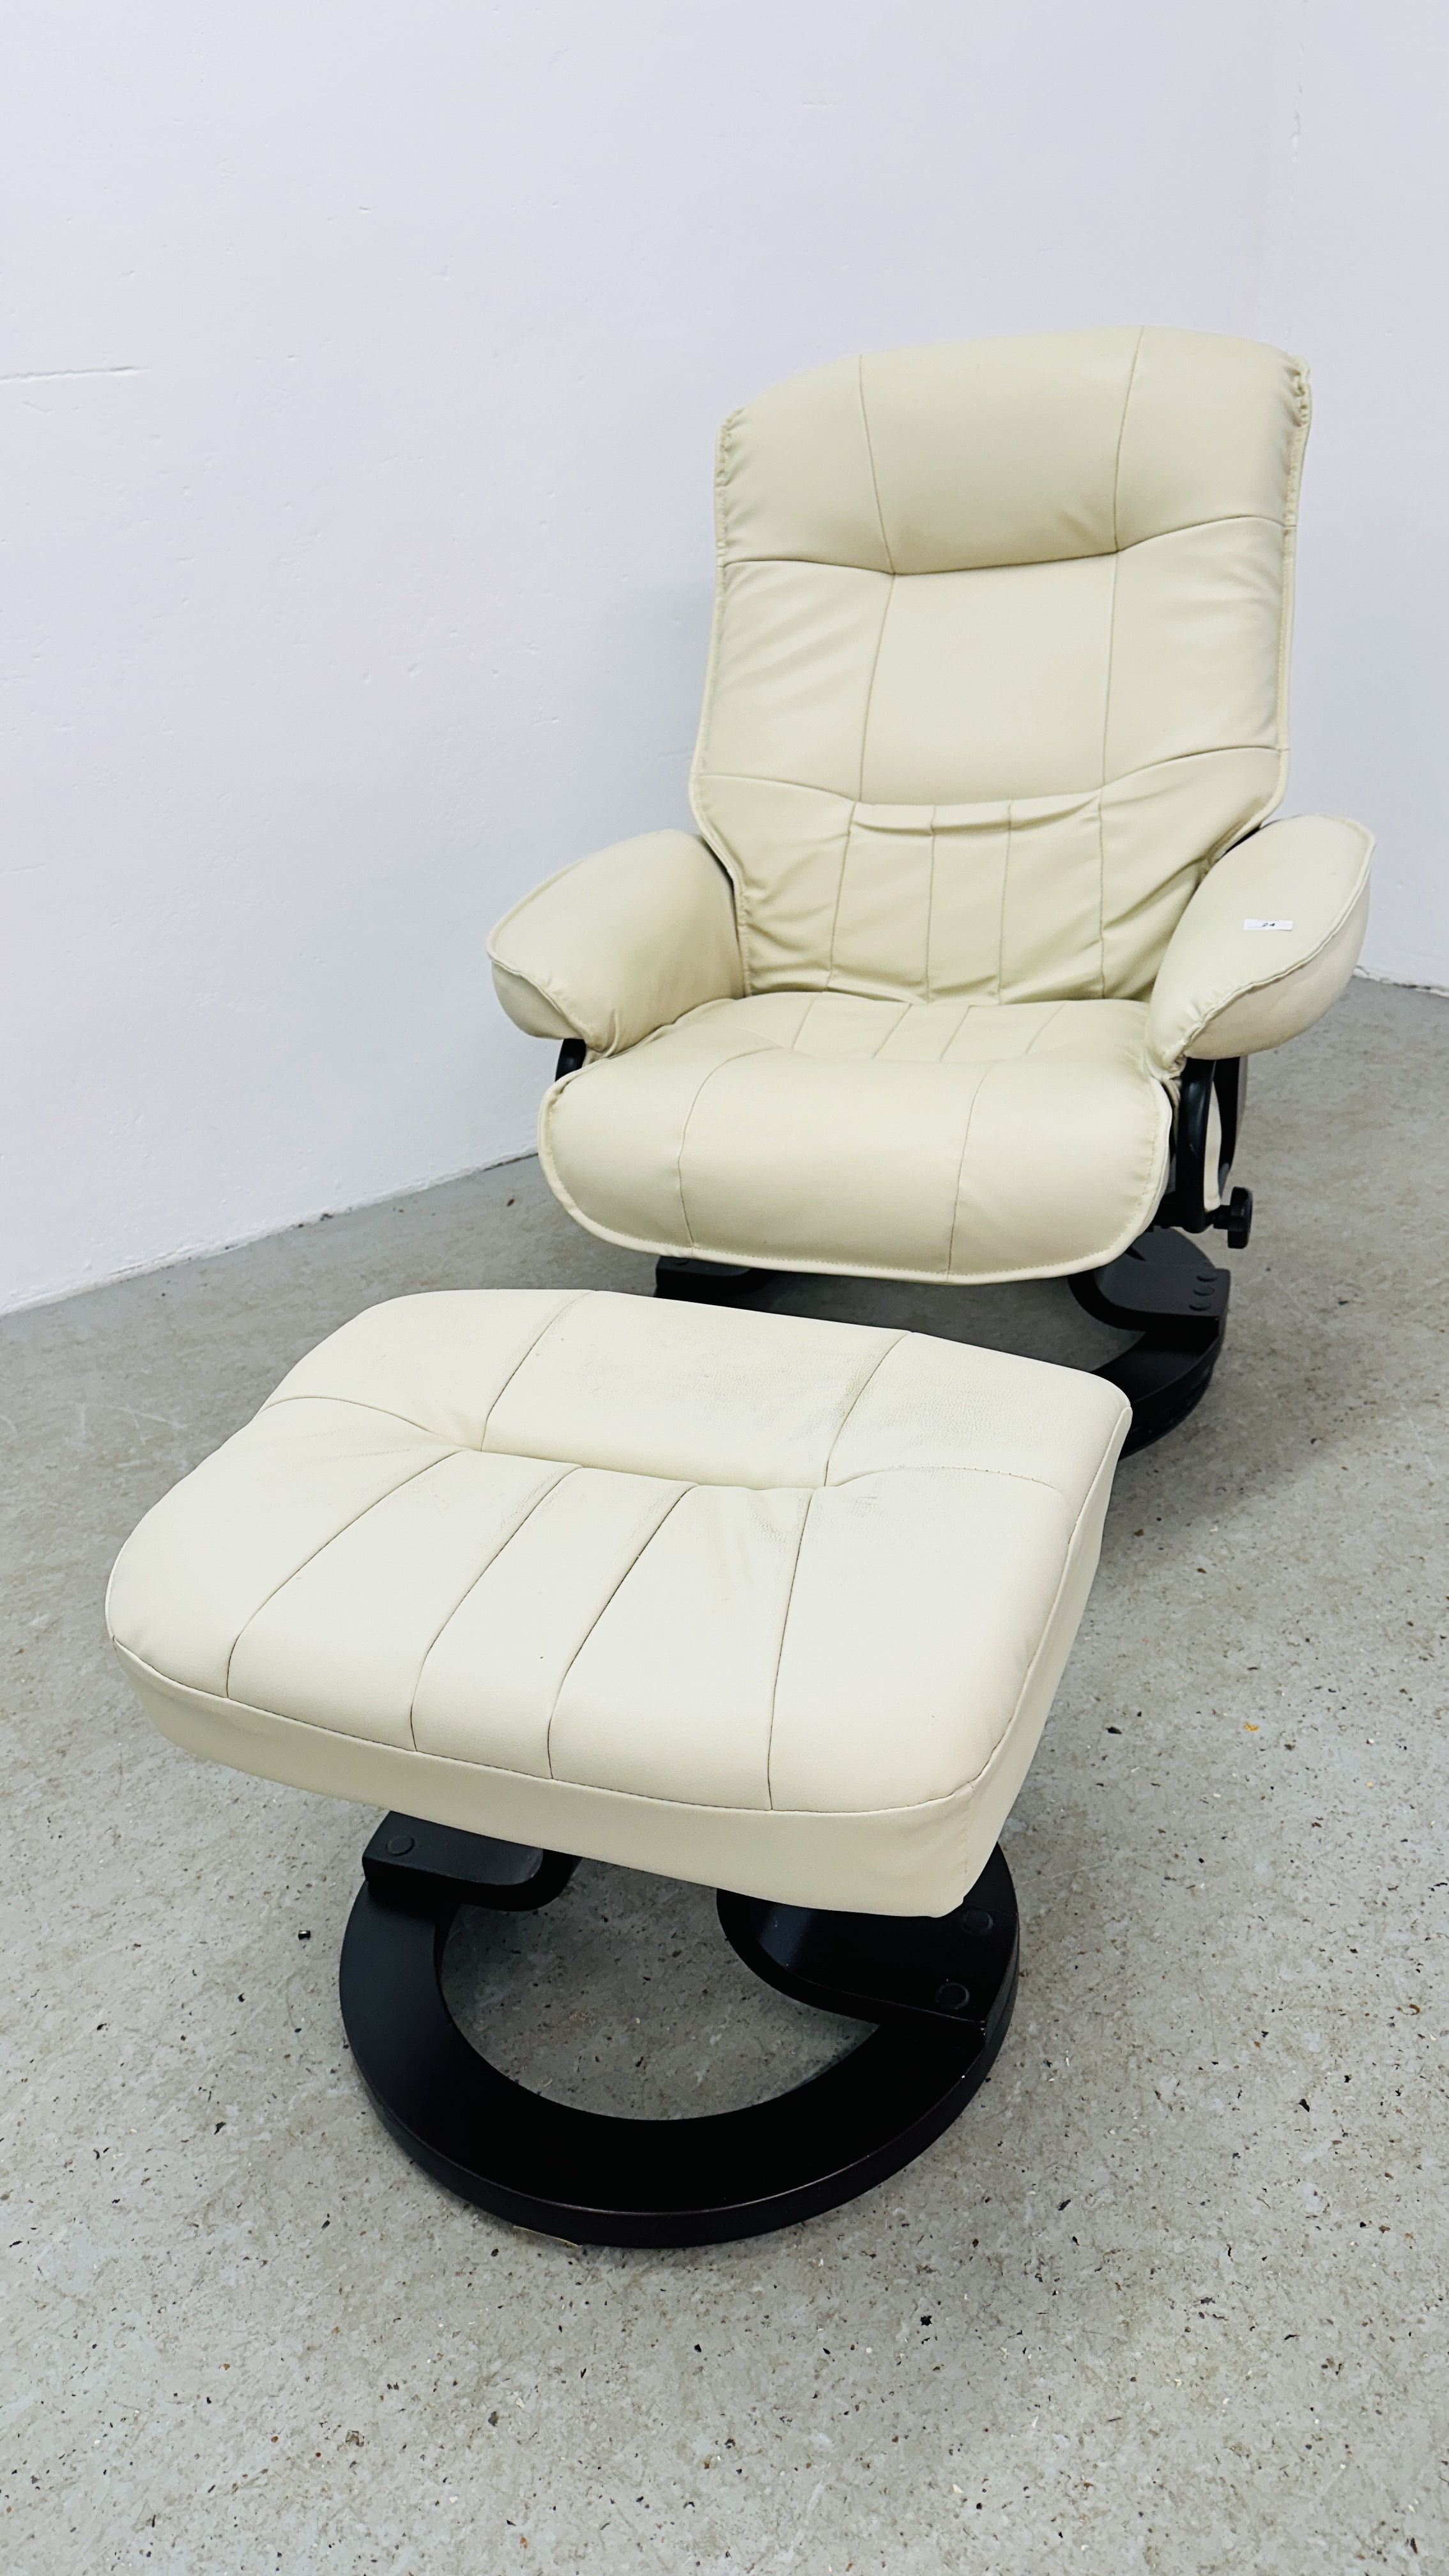 A MODERN CREAM FAUX LEATHER RECLINING RELAXER CHAIR AND FOOTSTOOL.